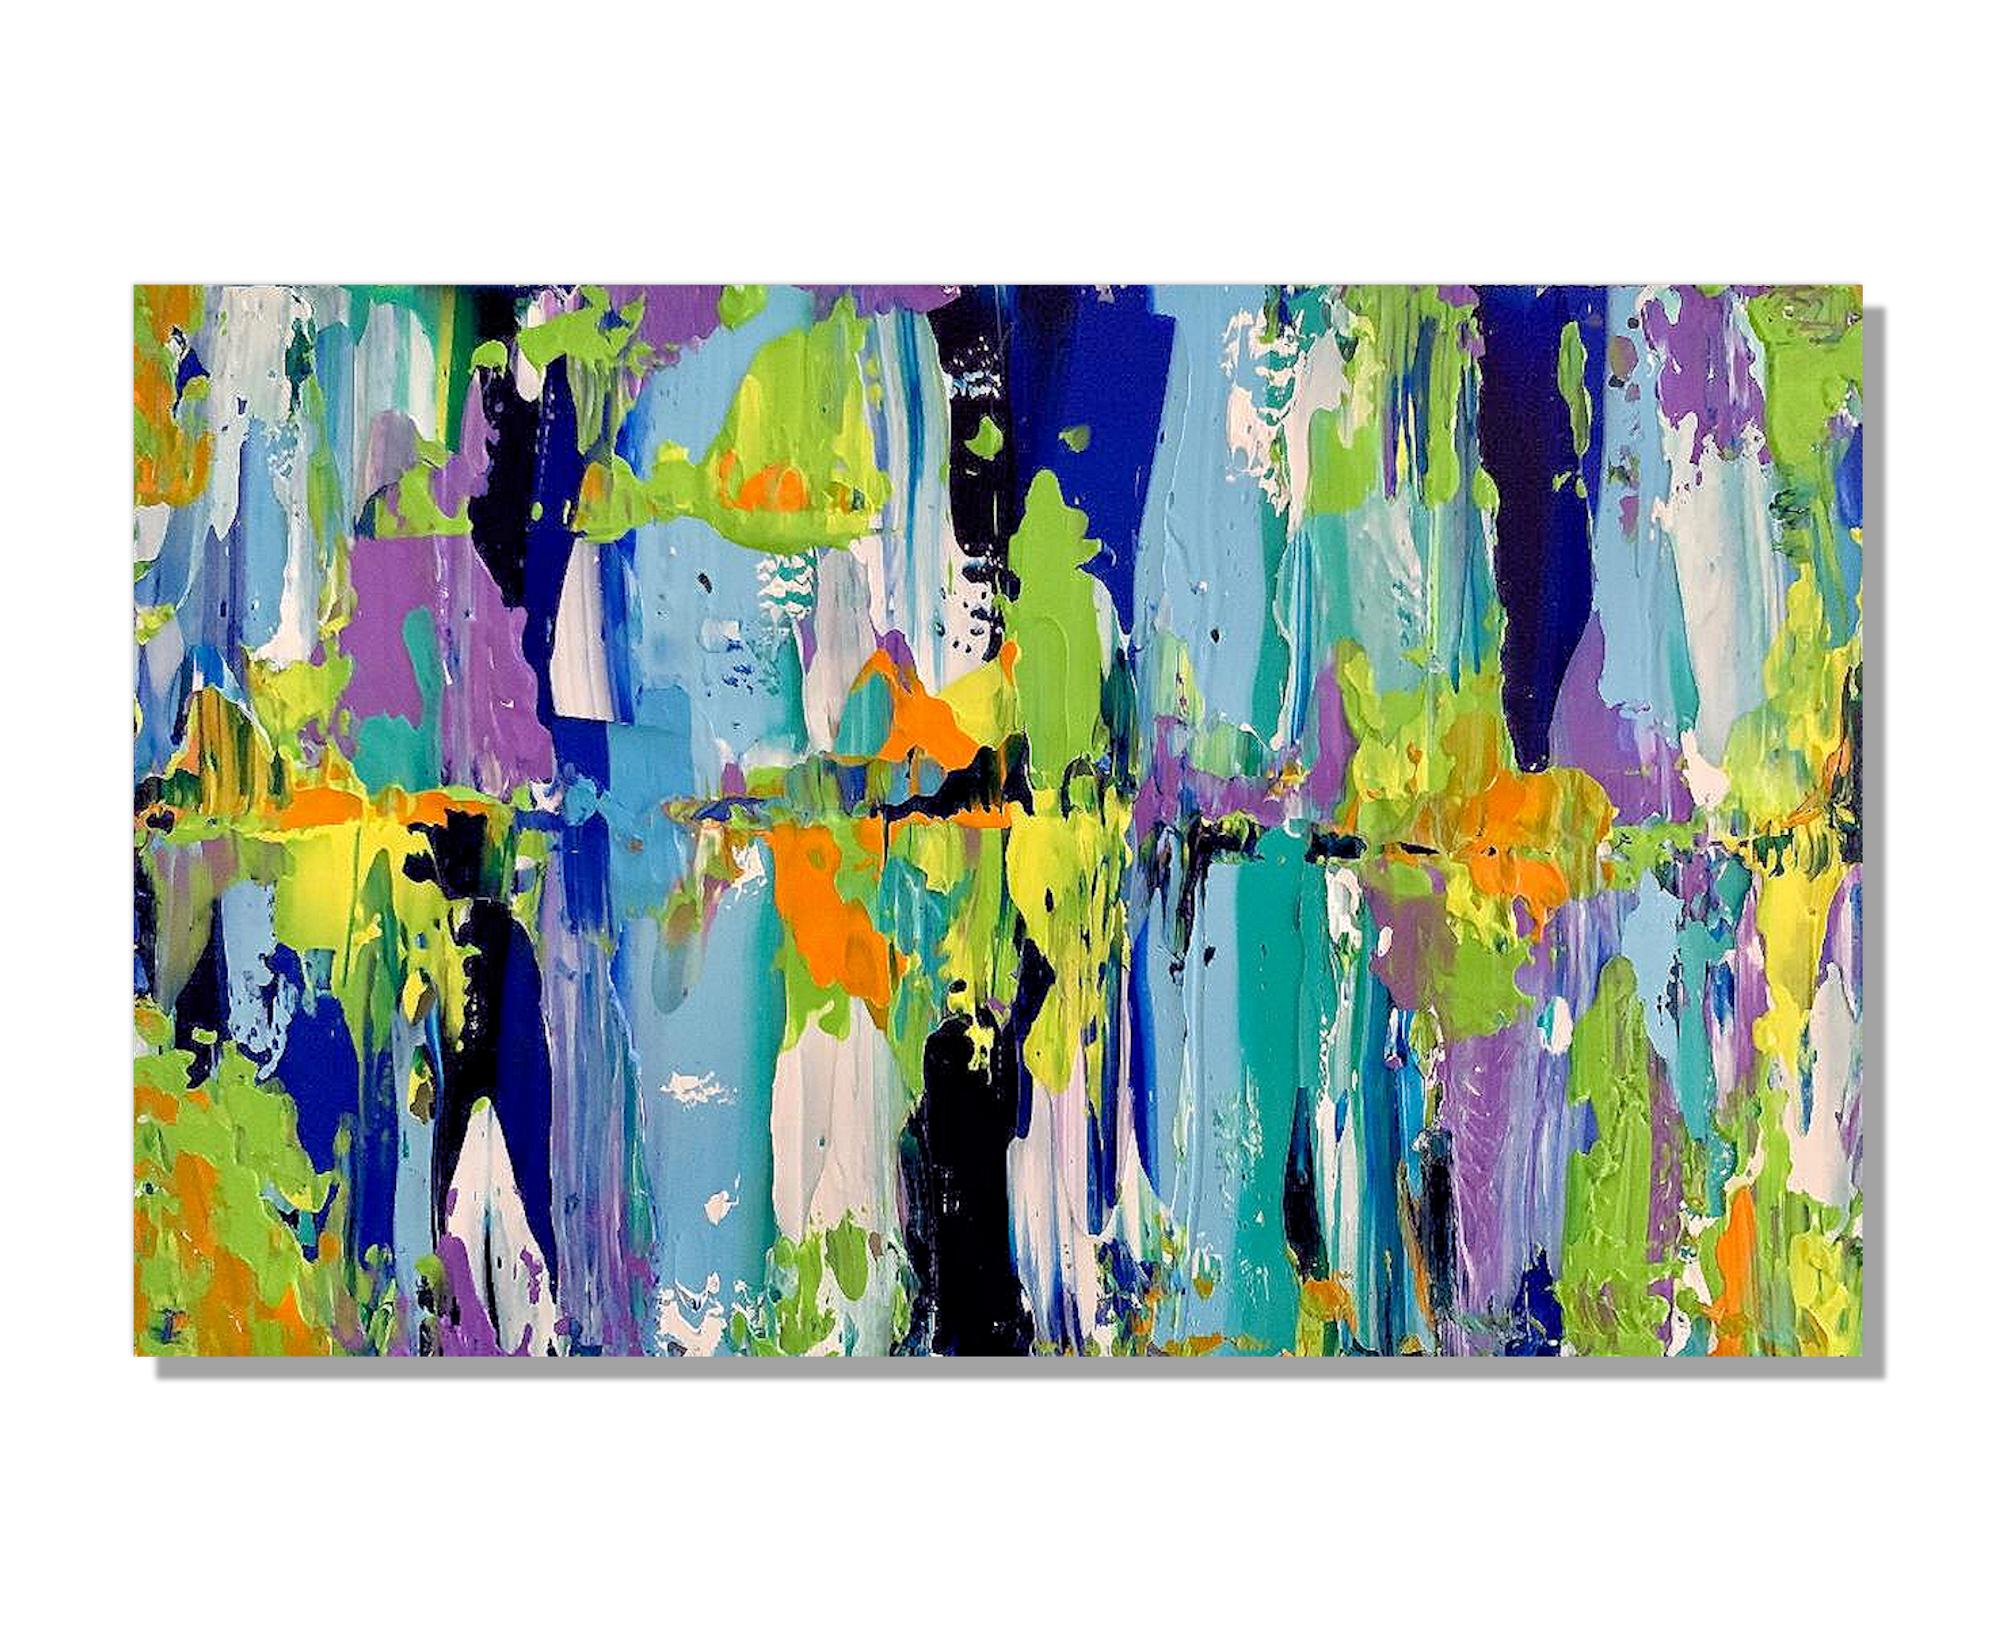 This contemporary modern colorful abstract knife painting is printed on a lightweight metal composite and comes ready to hang. The automotive high-gloss clear coat offers both UV protection and high-end modern finish. This vibrant composition can be